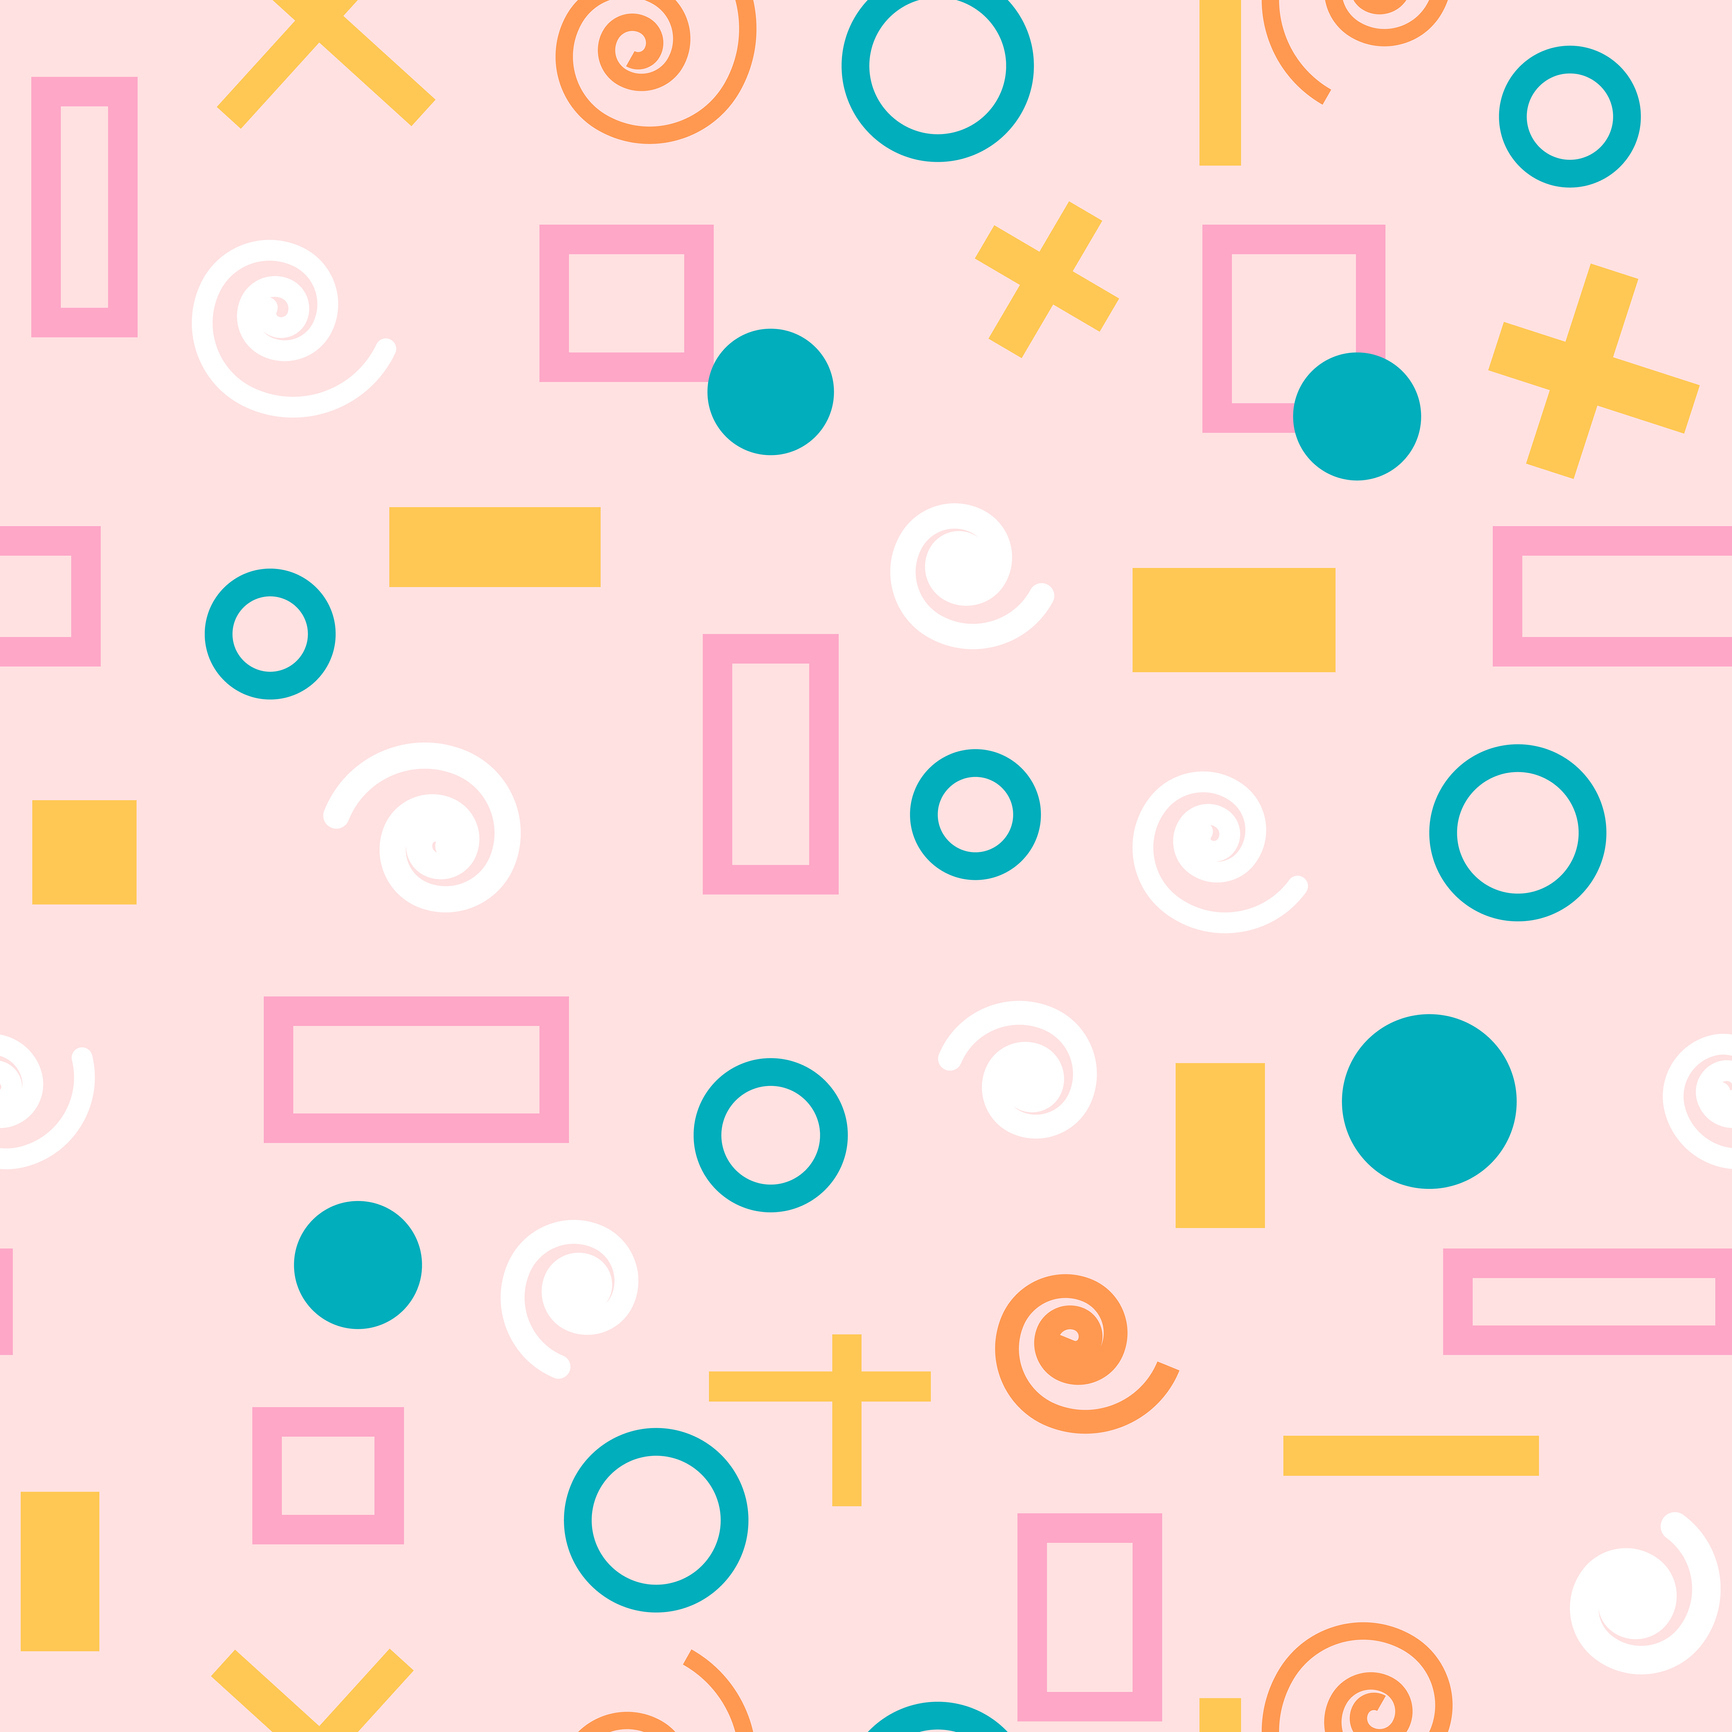 Geometric patterns in pink, turquoise, yellow, and white colors